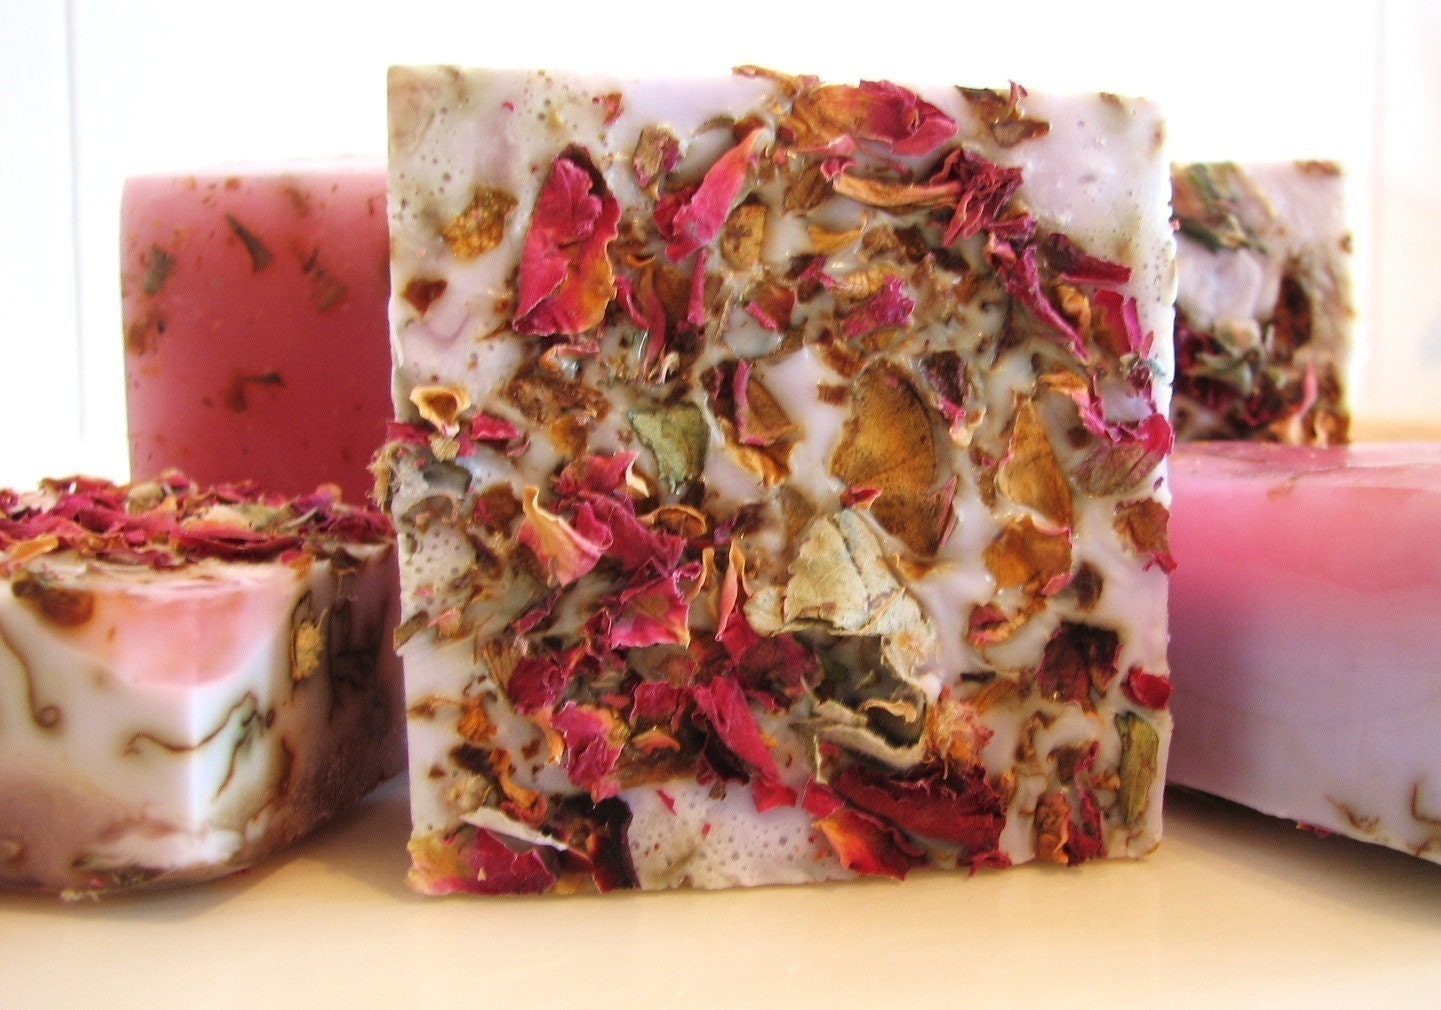 Lilac Rose Vegan Handmade Soap, made with real roses, lilac and coconut milk base.